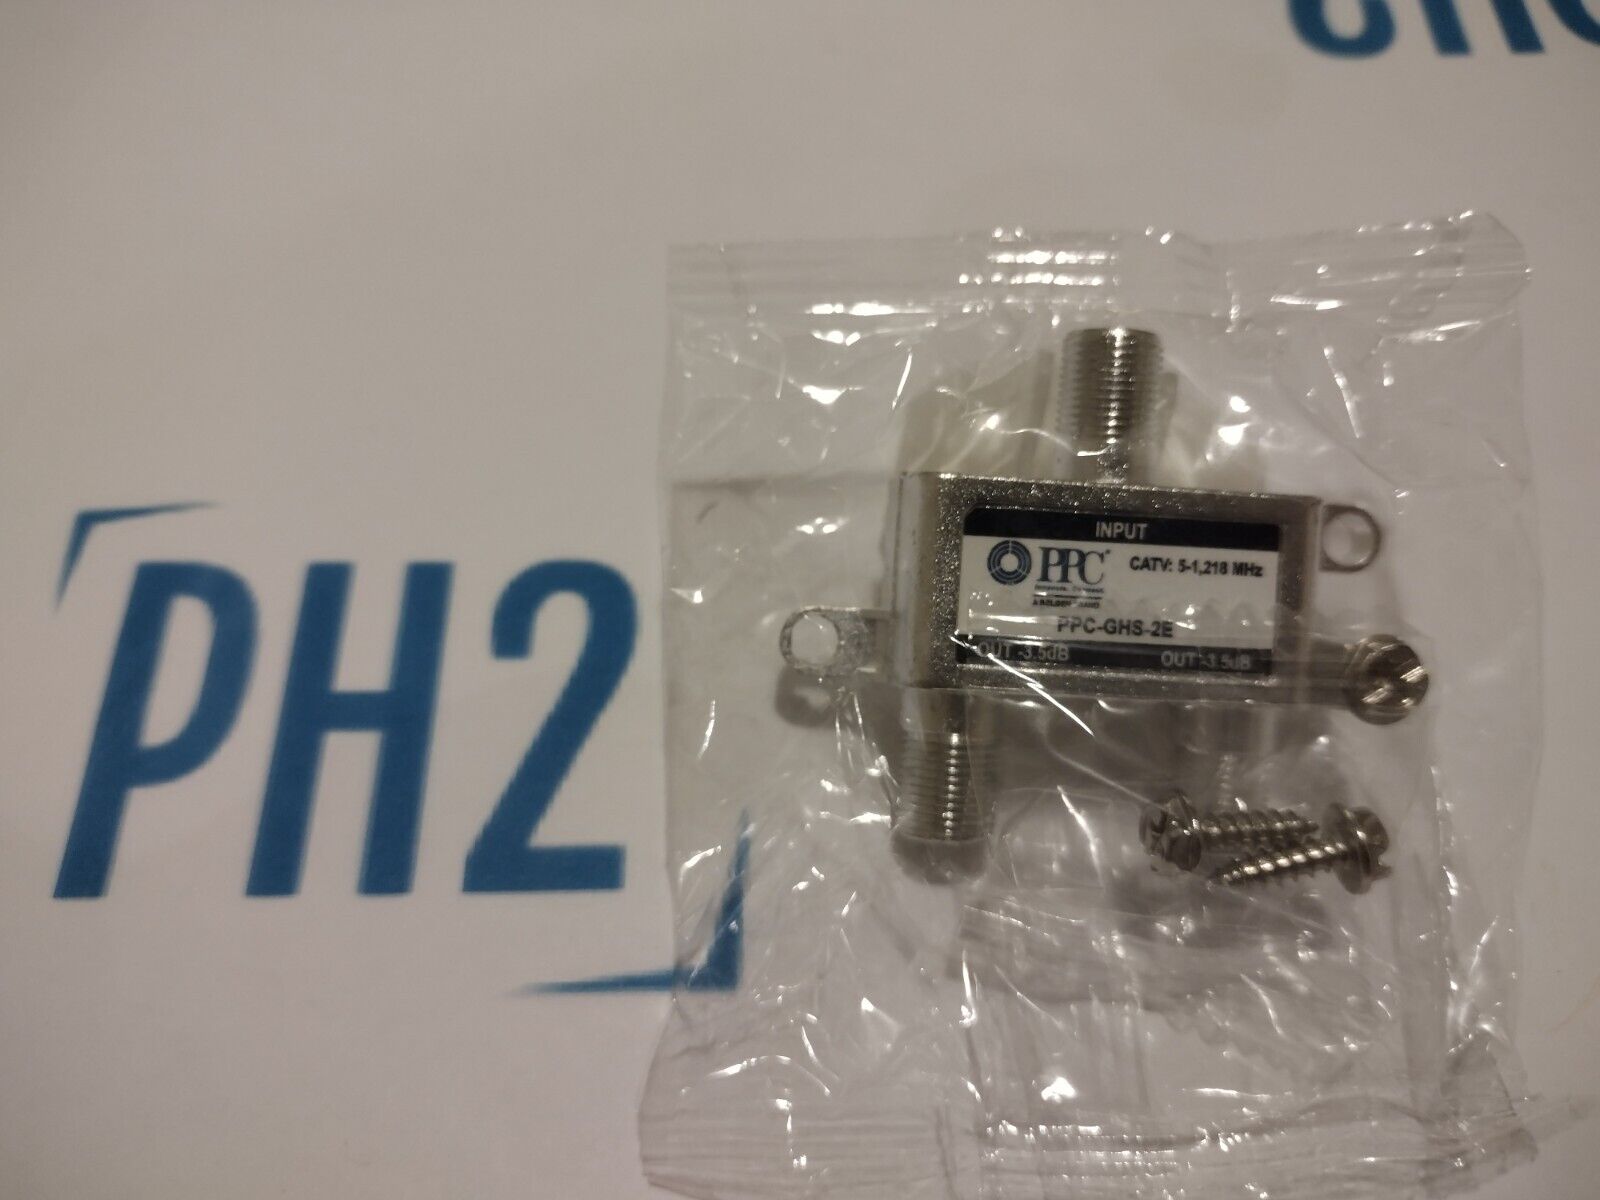 PPC PPC-GHS-2E 2-Way Digital 1Ghz High Performance Coax Cable Splitter